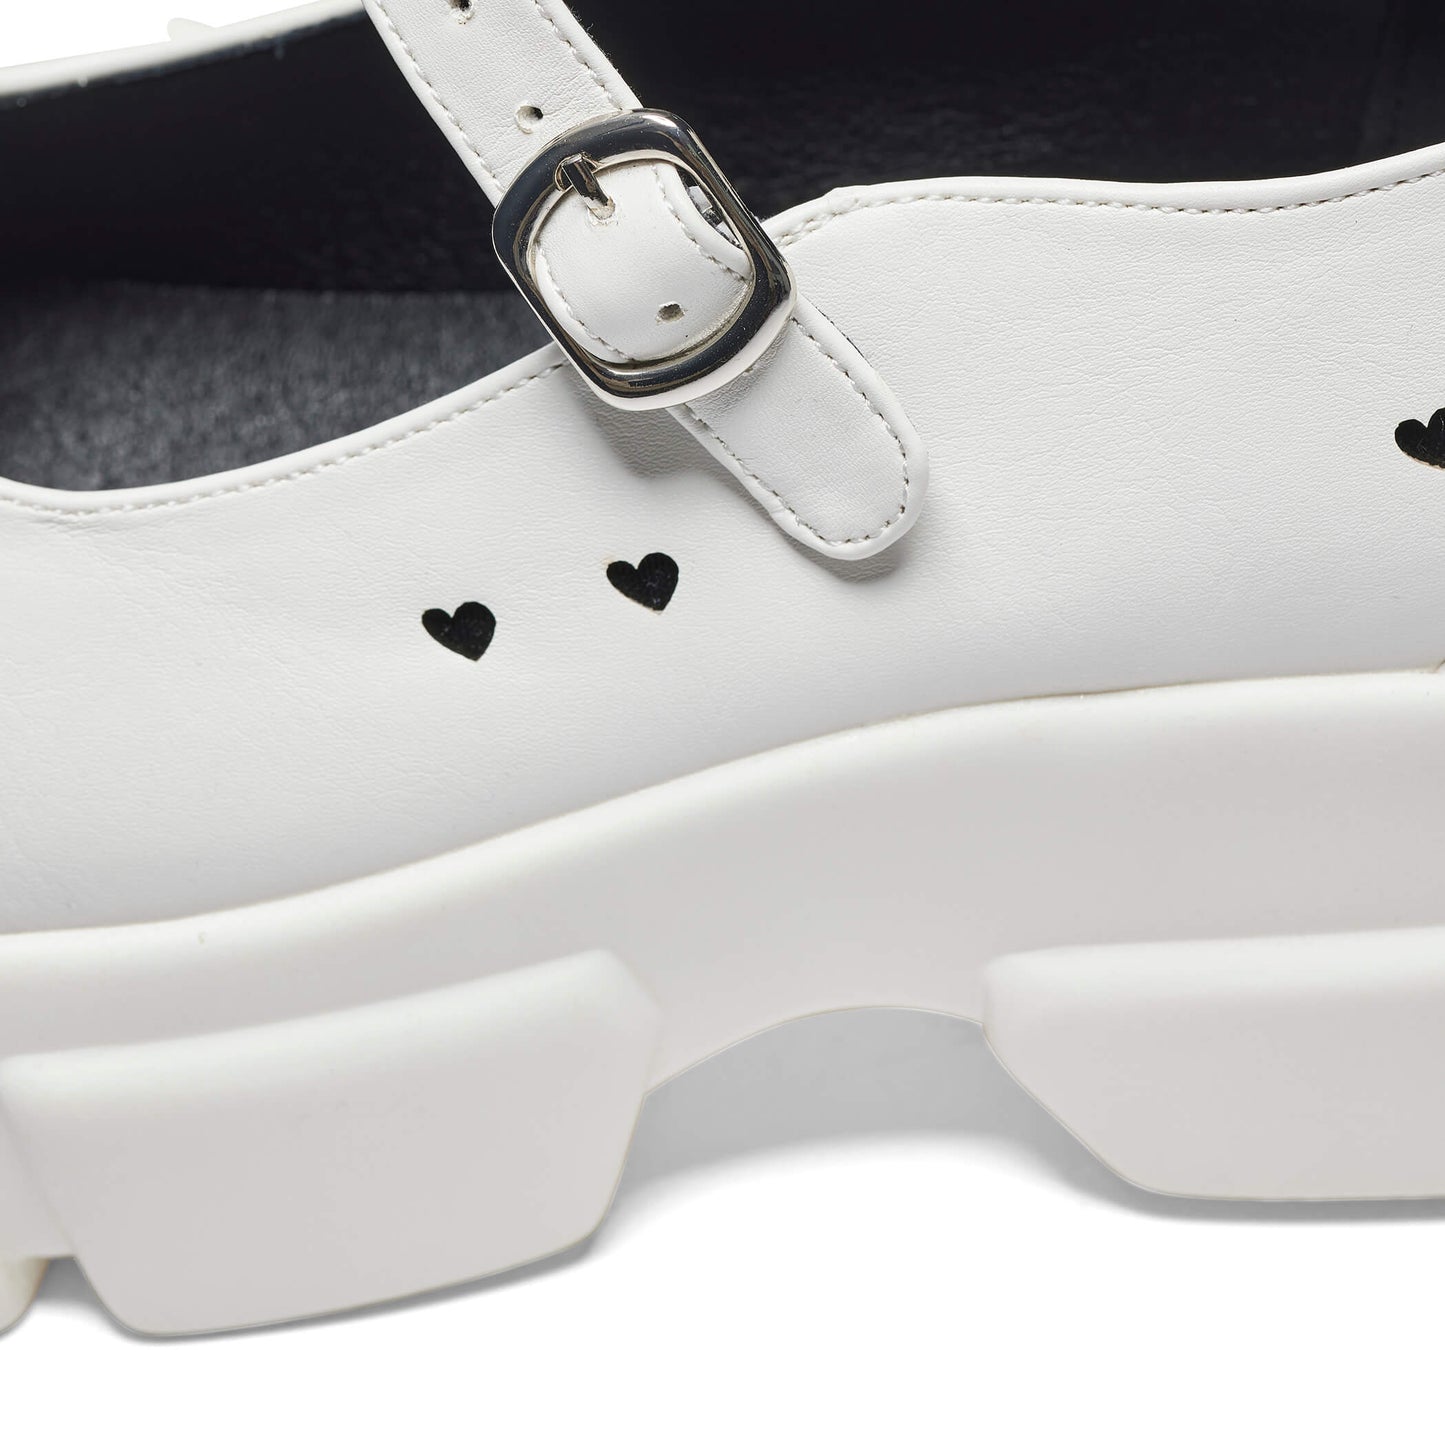 Harmony Heart Mary Jane Shoes - White - Shoes - KOI Footwear - White - Buckle Detail